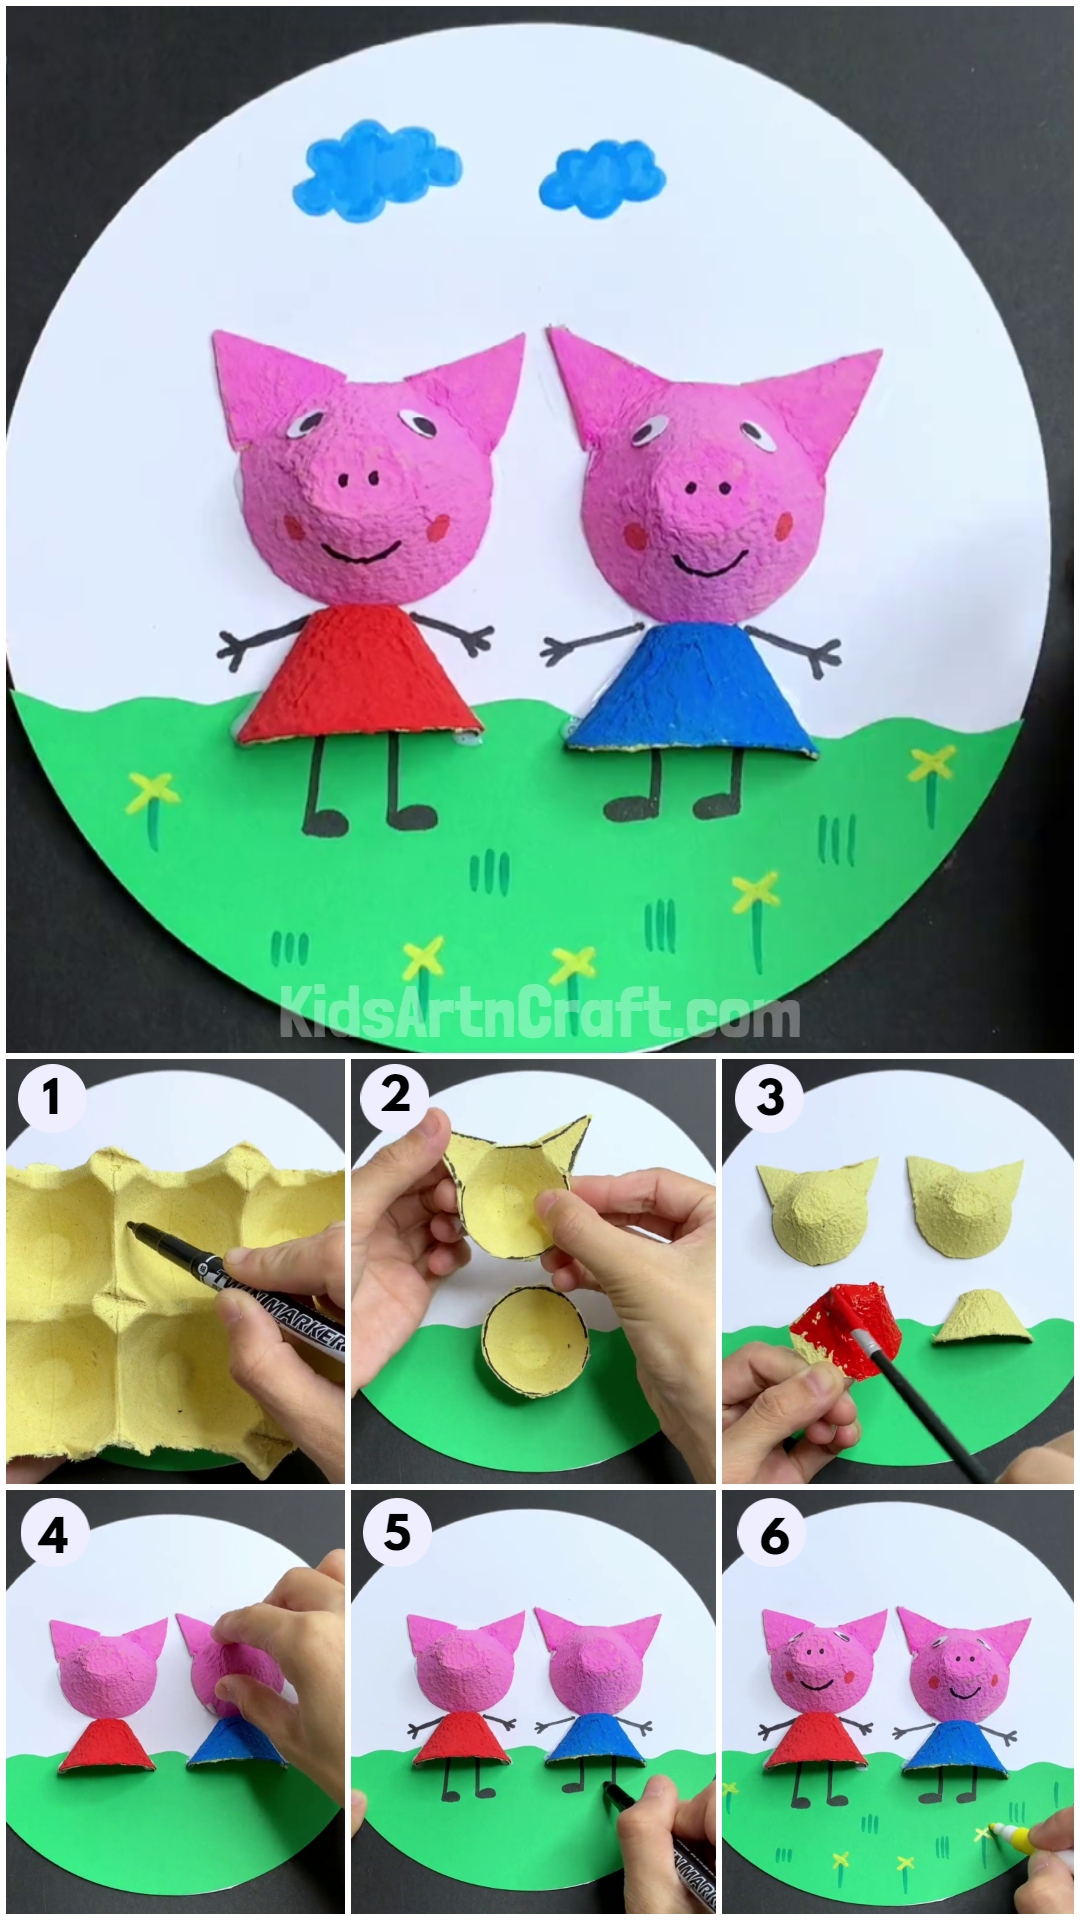  Easy Egg Carton Pigs Step by Step Tutorial For Kids